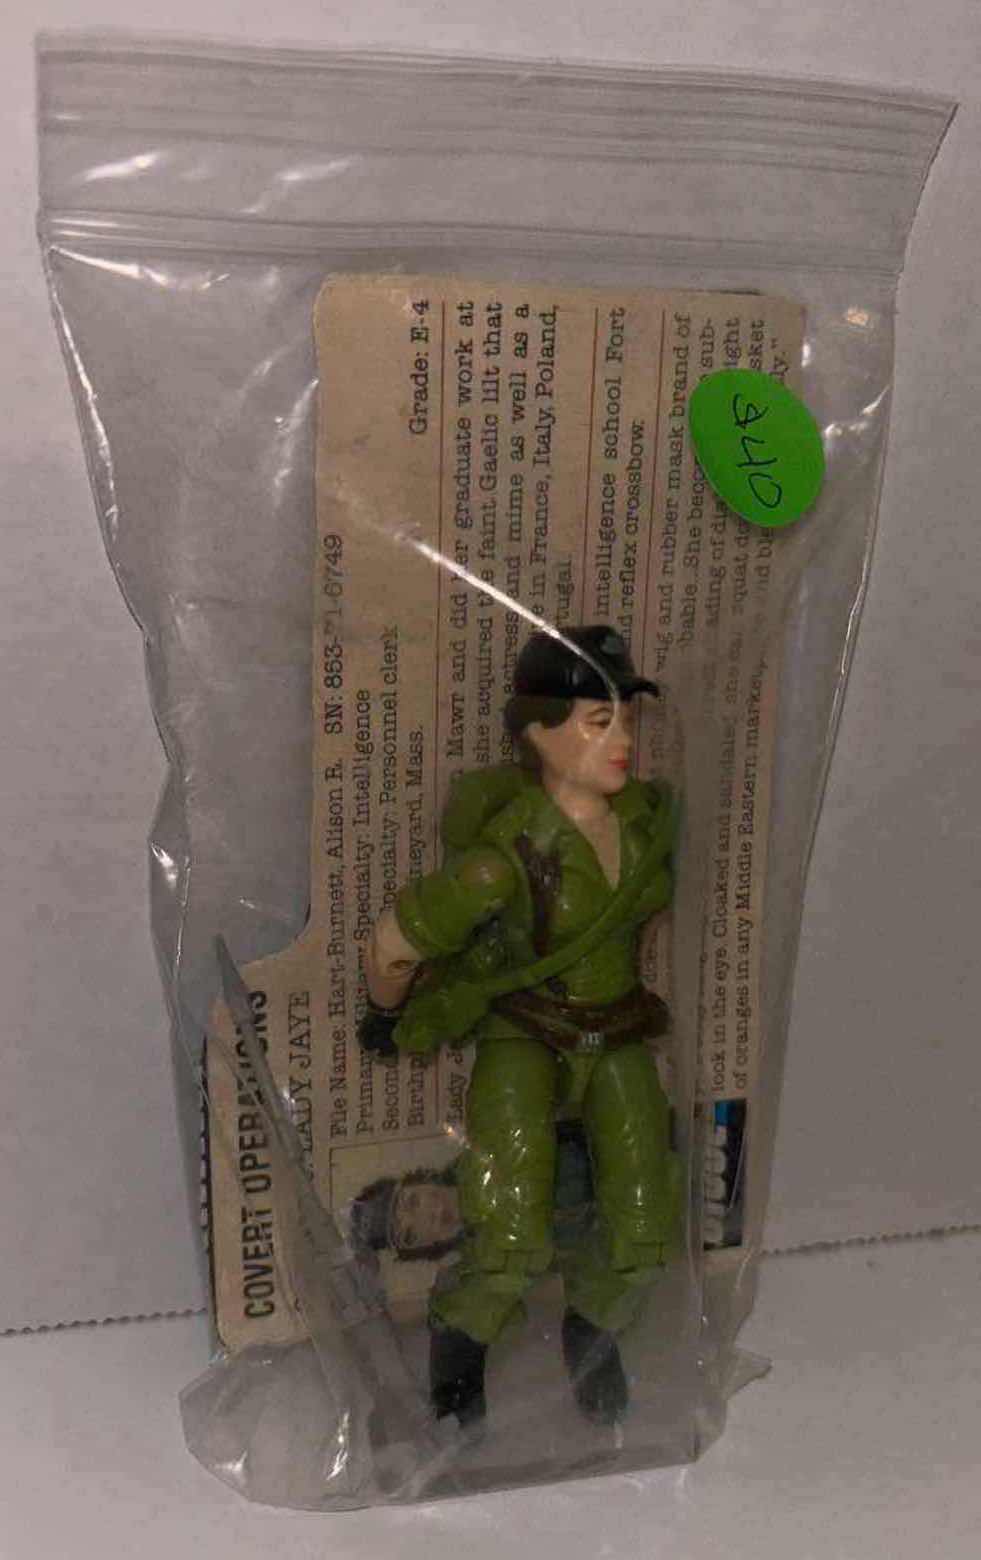 Photo 2 of VINTAGE G.I. JOE 2-PACK ACTION FIGURES & ACCESSORIES, “1985 COVERT OPERATIONS: LADY JAYE & 1983 FIRST SERGEANT: DUKE” INCLUDES CHARACTER FILE CARDS **NO RETURNS**